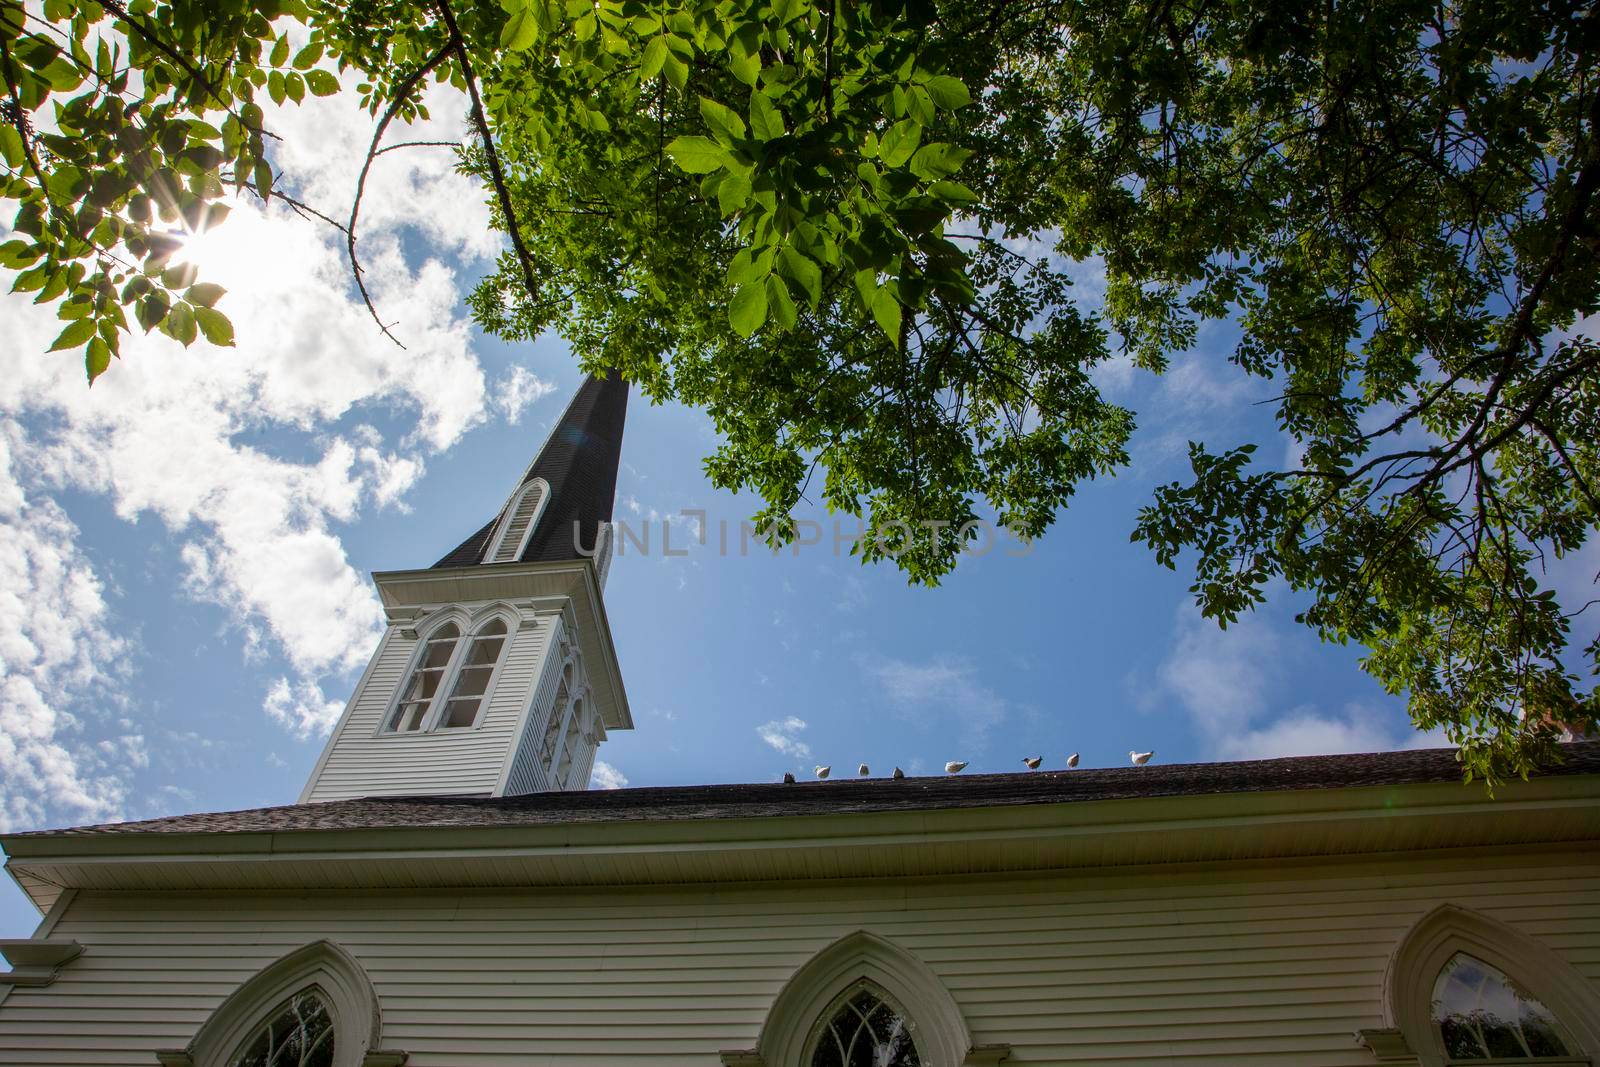  August 18, 2019 - Highway 2 Five Islands, Nova Scotia- seagulls perched along the top of the Peniel United Church 